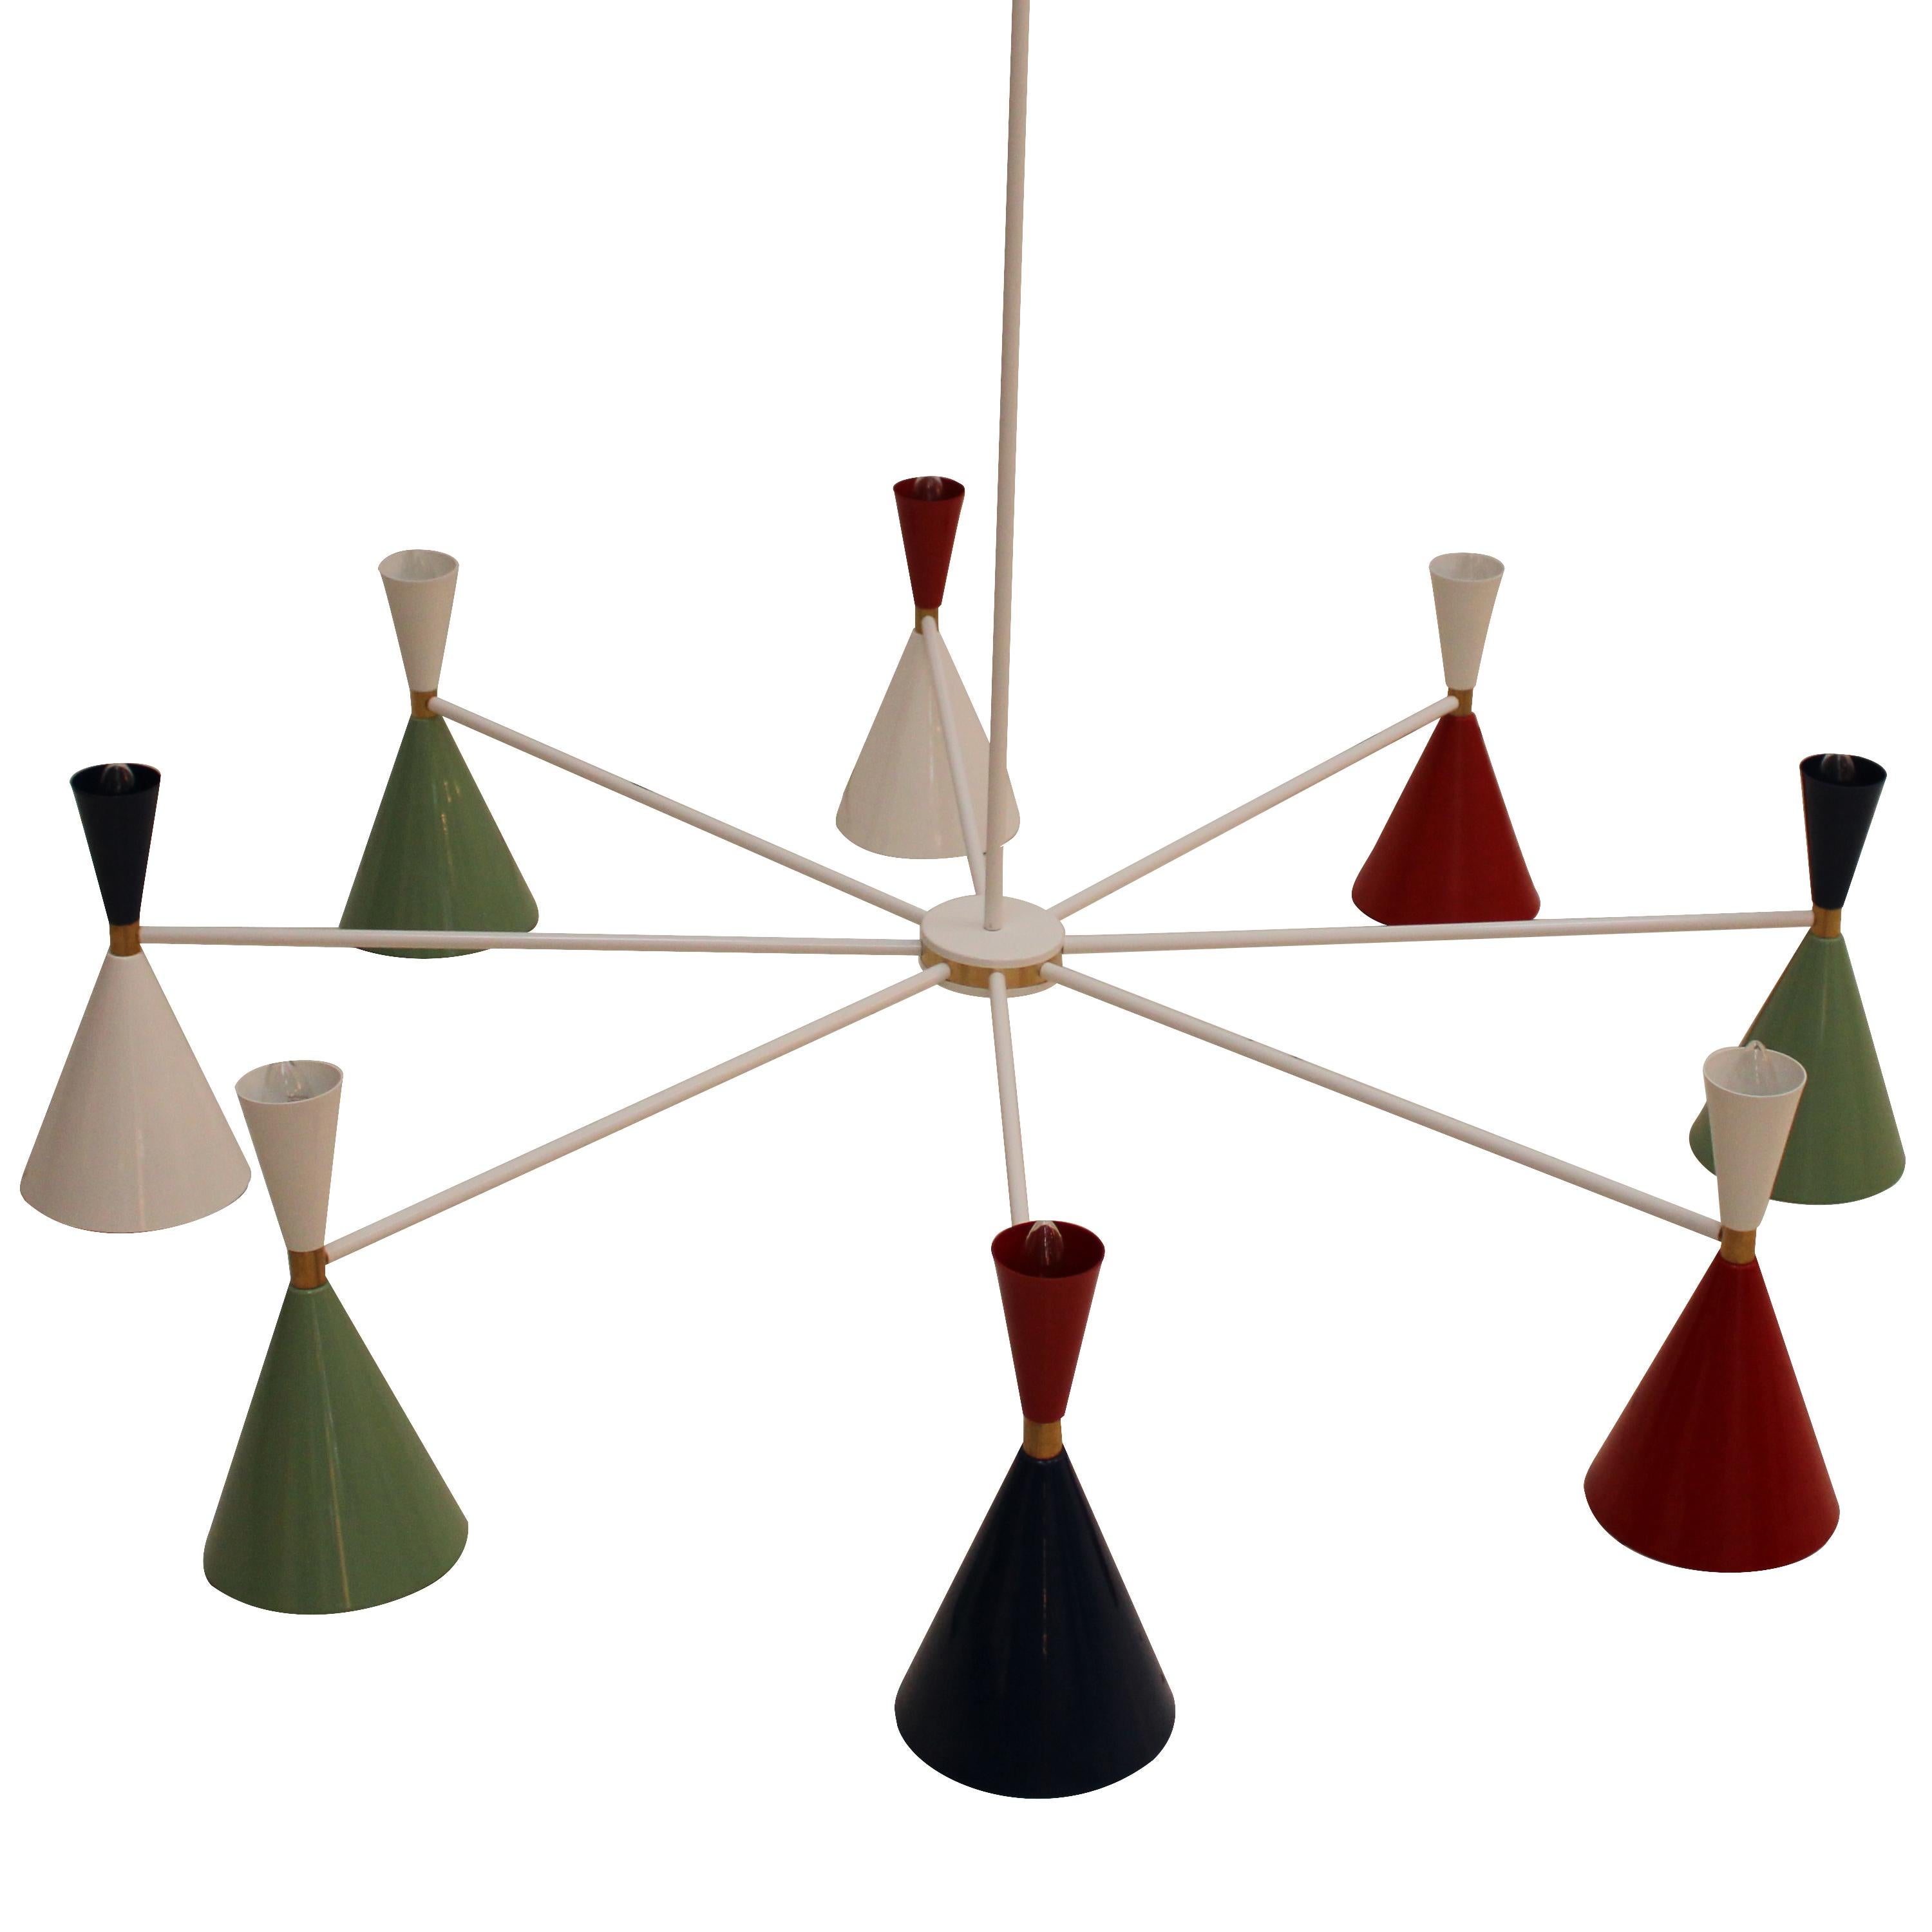 Contemporary IKB191 Stilnovo suspension lamp, with brass structure, and 8 conic colored light shades, Spain, 2020.